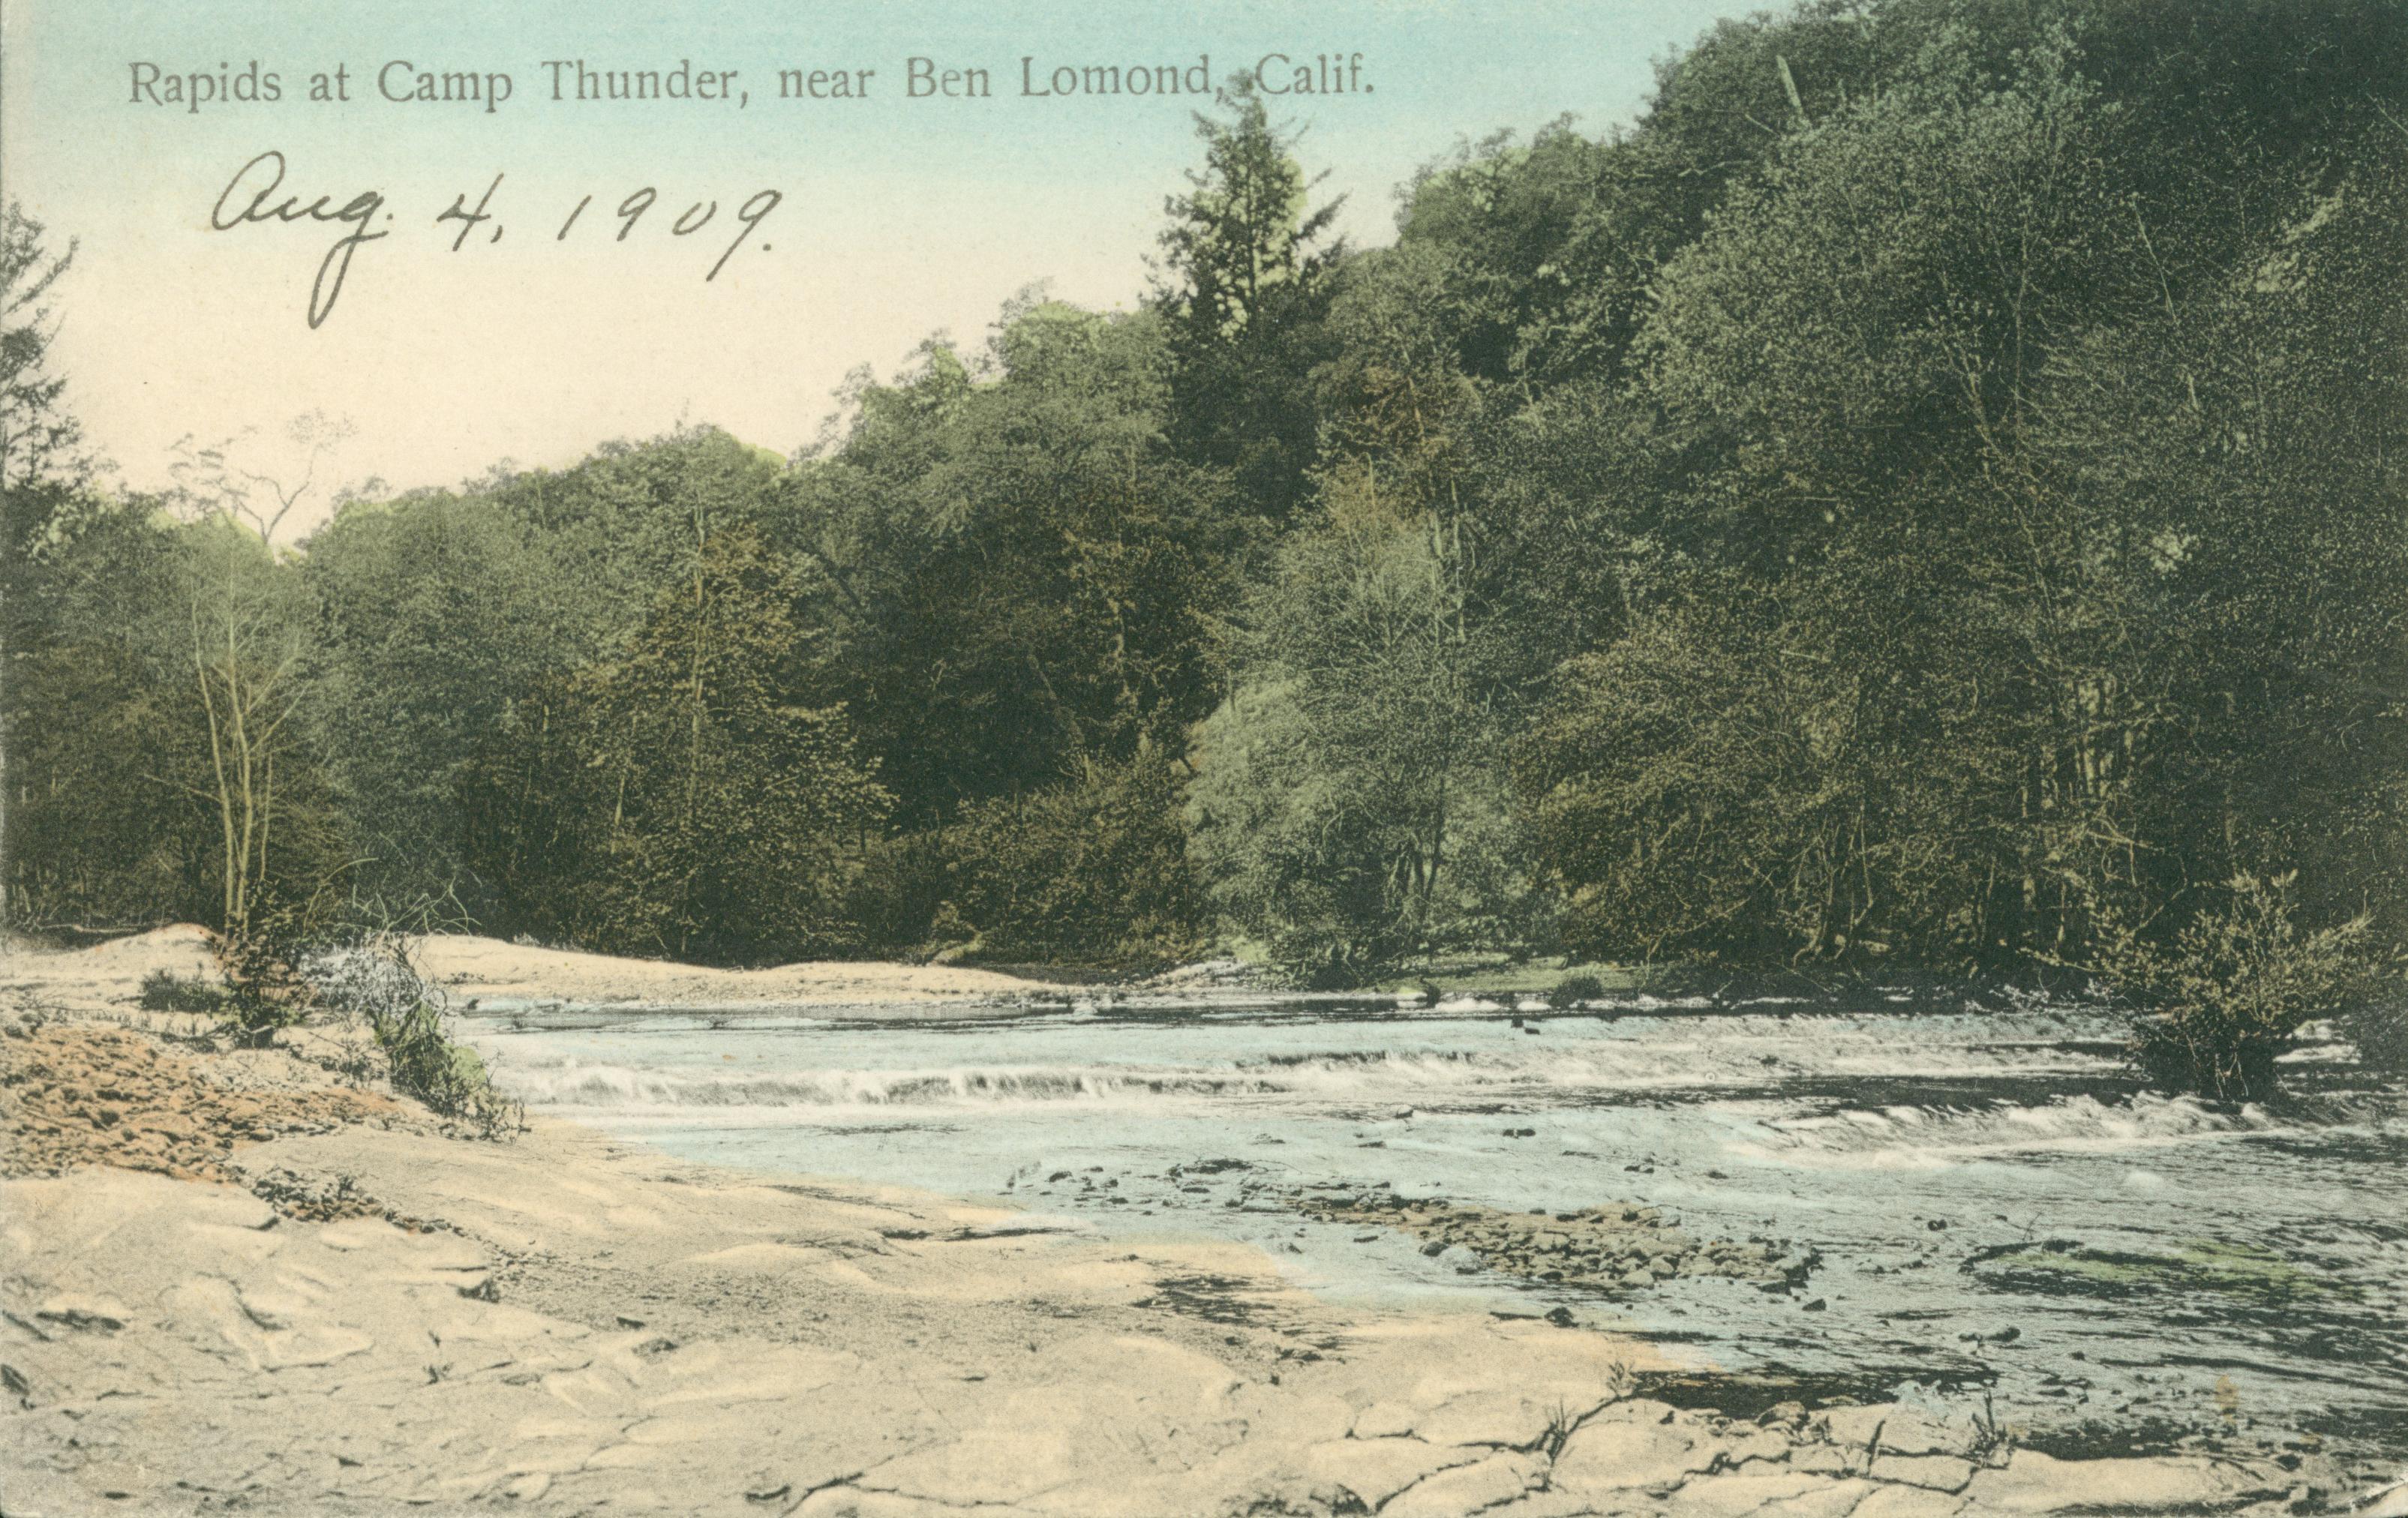 Shows a tree-lined set of river rapids